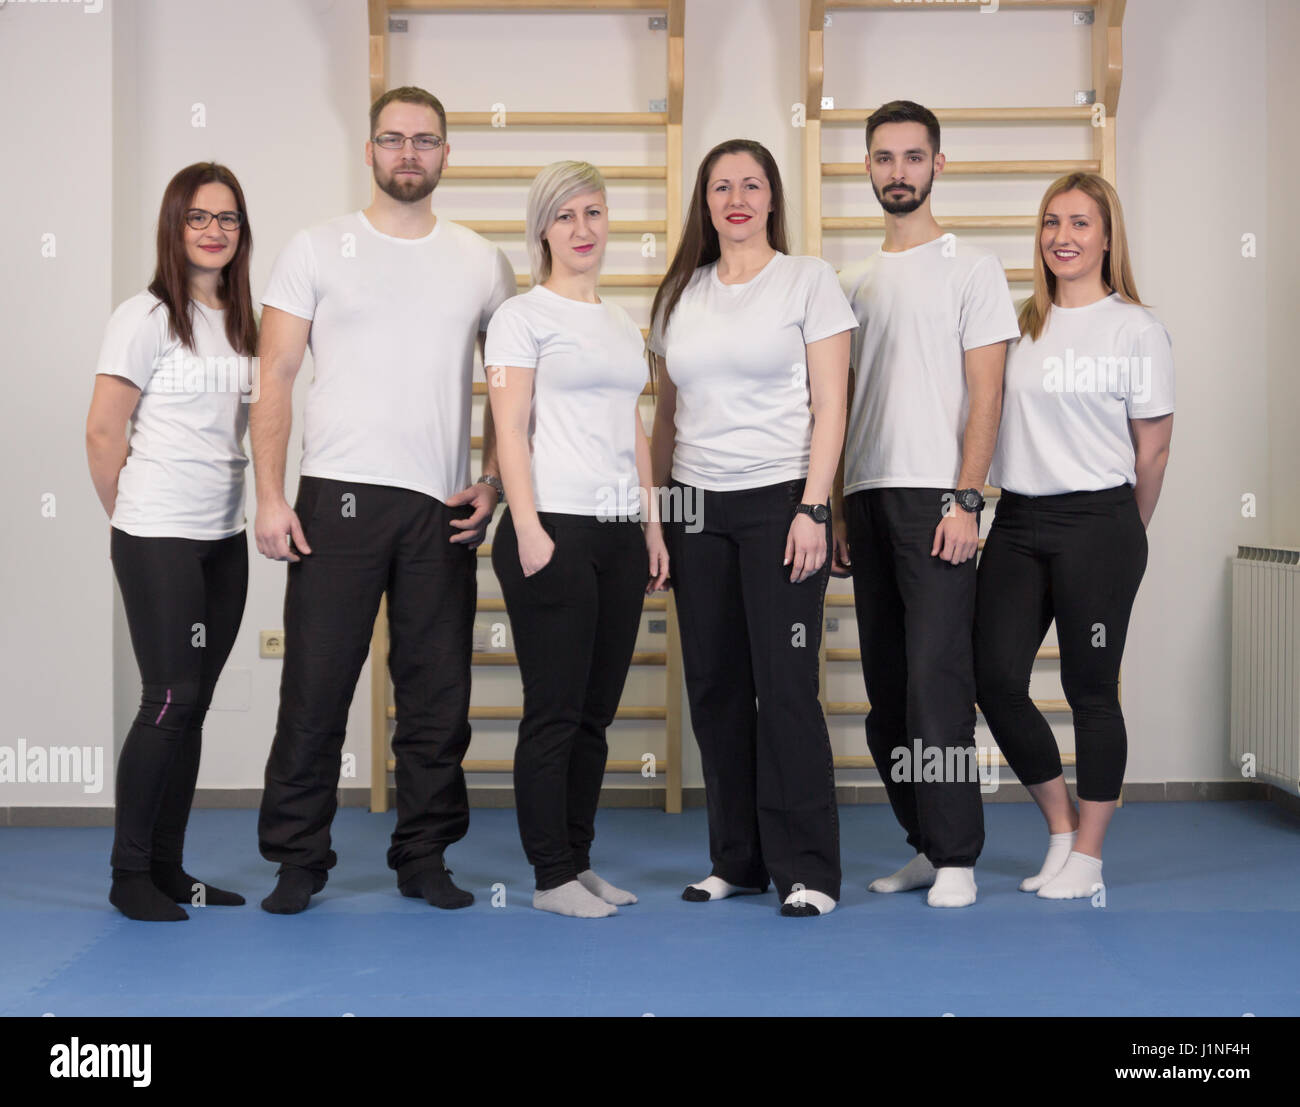 large group people, Physiotherapists chiropractors, indoors portrait Stock Photo